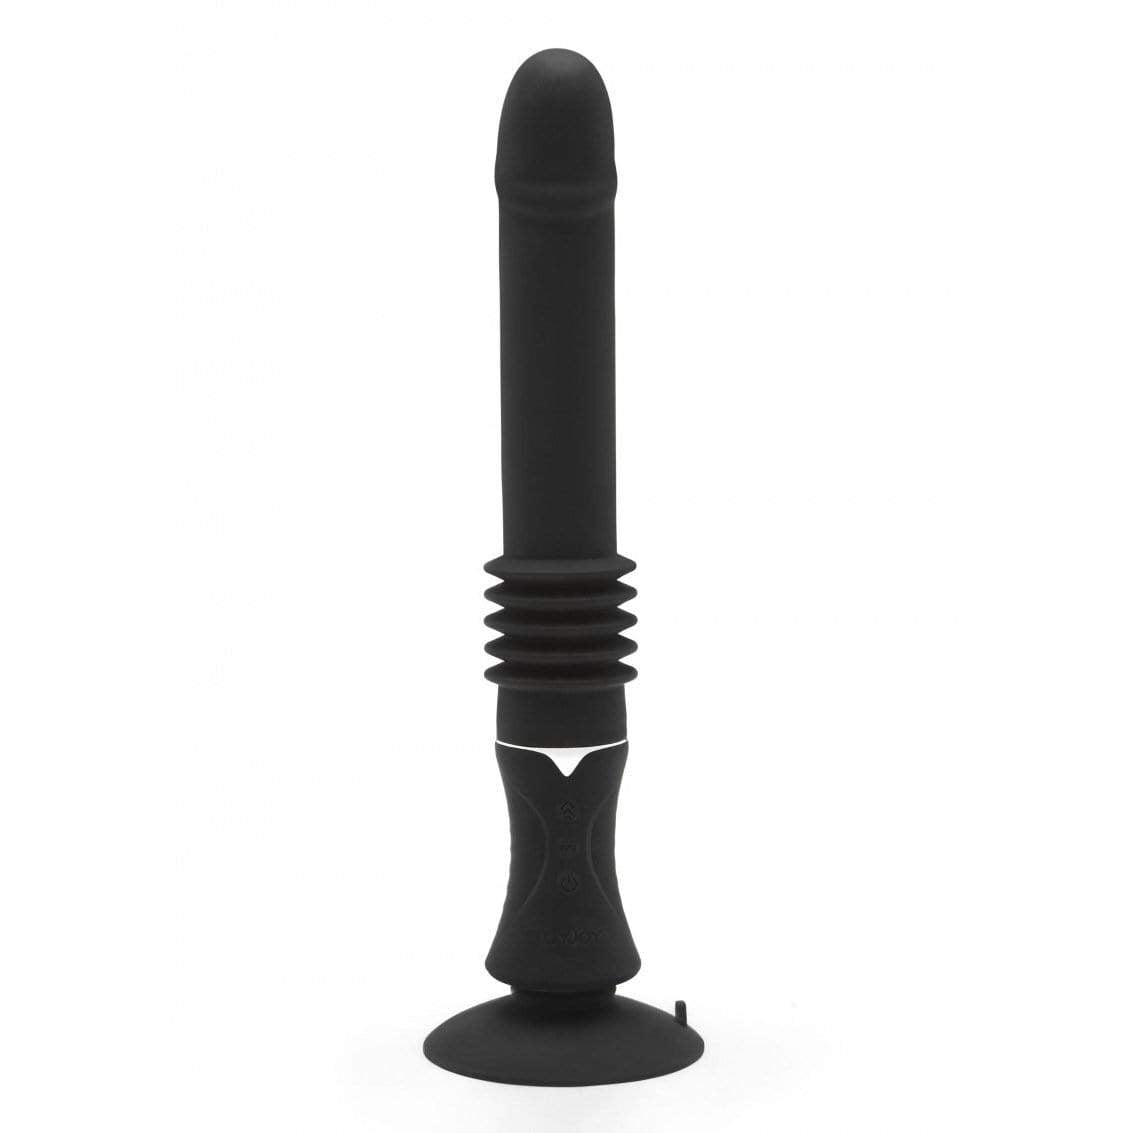 ToyJoy - Sexentials Majestic Thrusting Vibe Vibrator (Black) -  Non Realistic Dildo w/o suction cup (Vibration) Rechargeable  Durio.sg